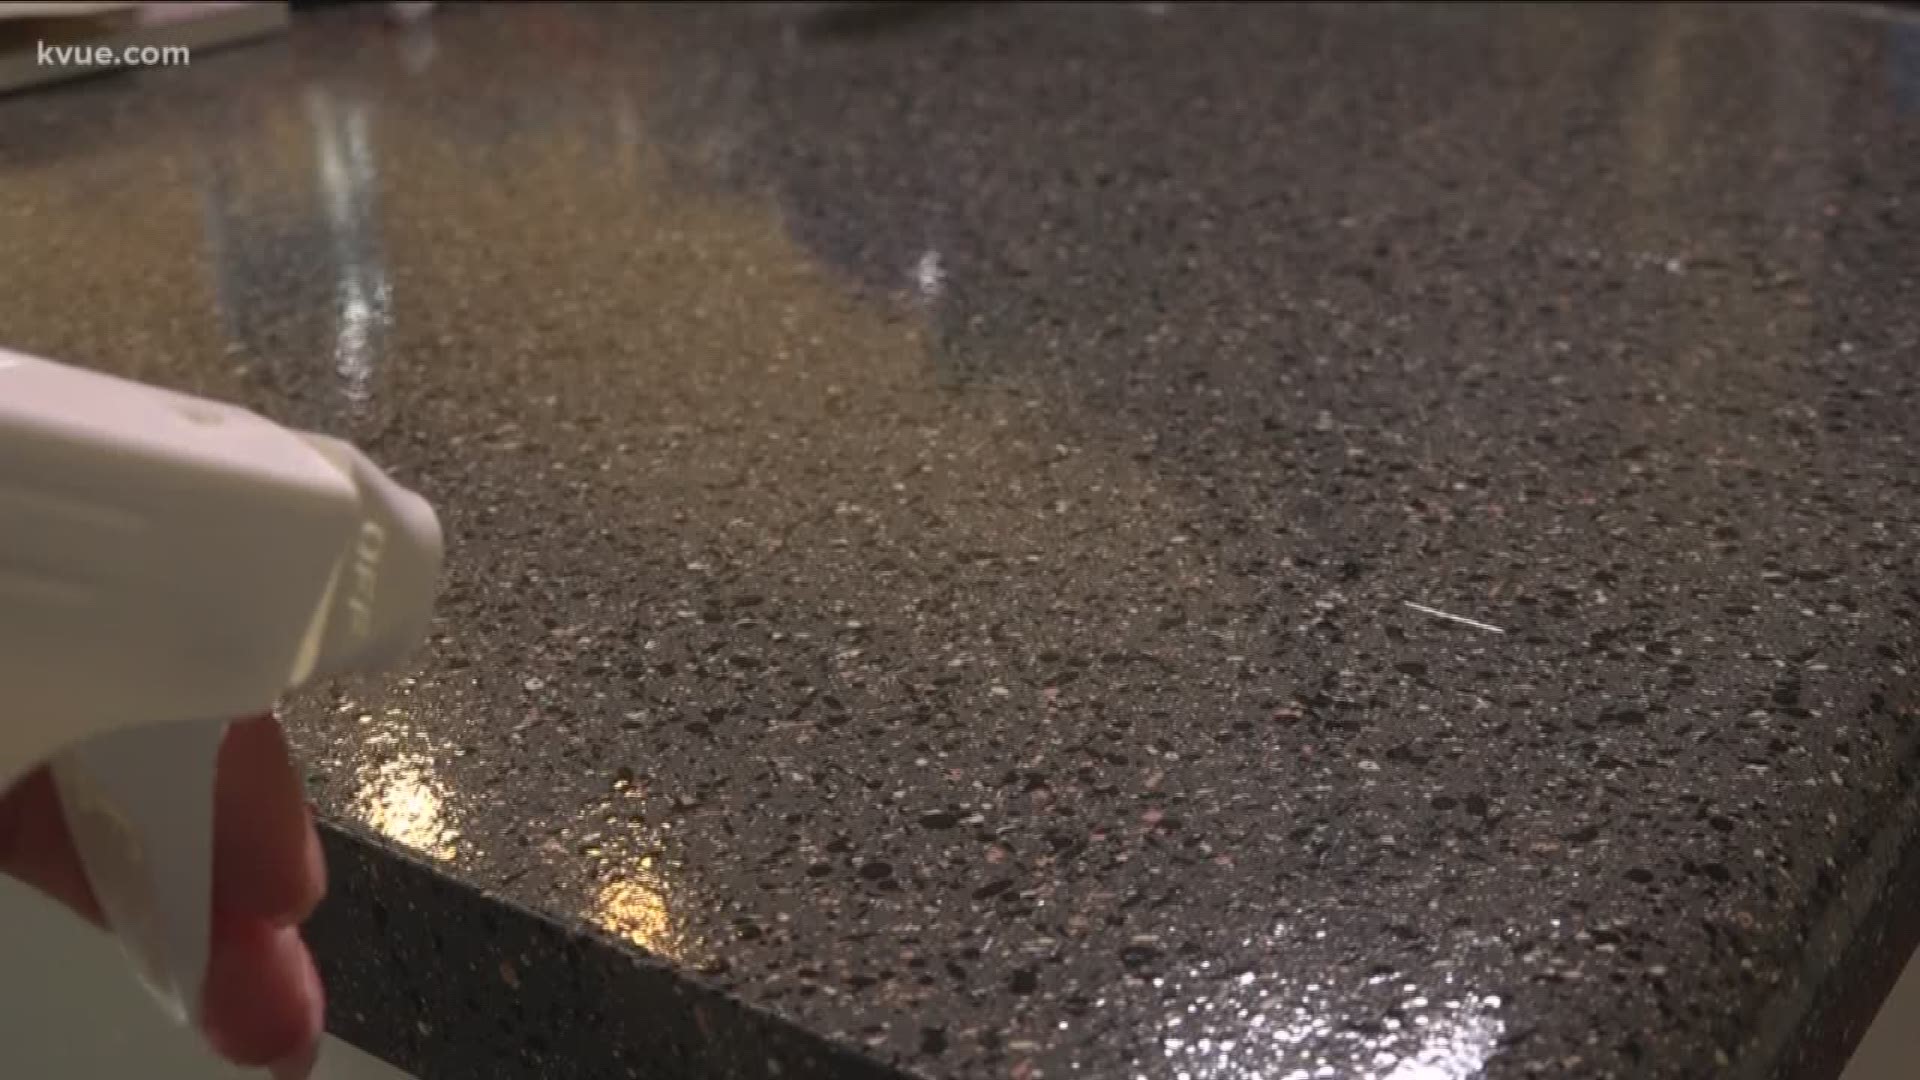 A survey found 42% of people are not disinfecting their surfaces properly.